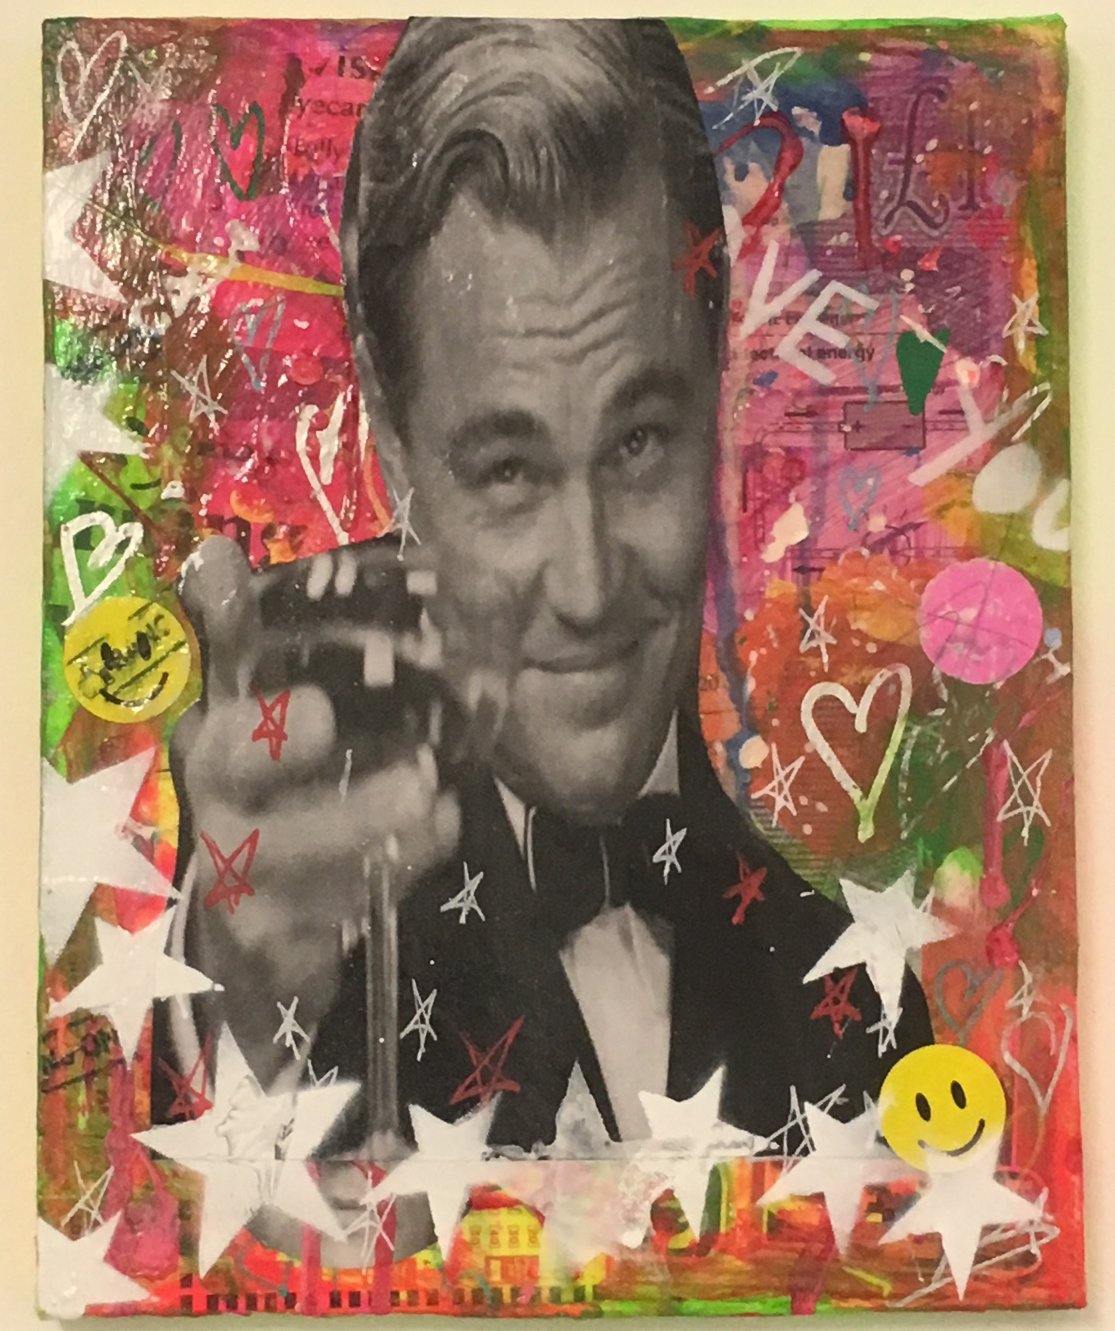 Cheers by Barrie J Davies 2018, mixed media on canvas, 20cm x 25cm, unframed. Barrie J Davies is an Artist - Pop Art and Street art inspired Artist based in Brighton England UK - Pop Art Paintings, Street Art Prints & Editions available. 